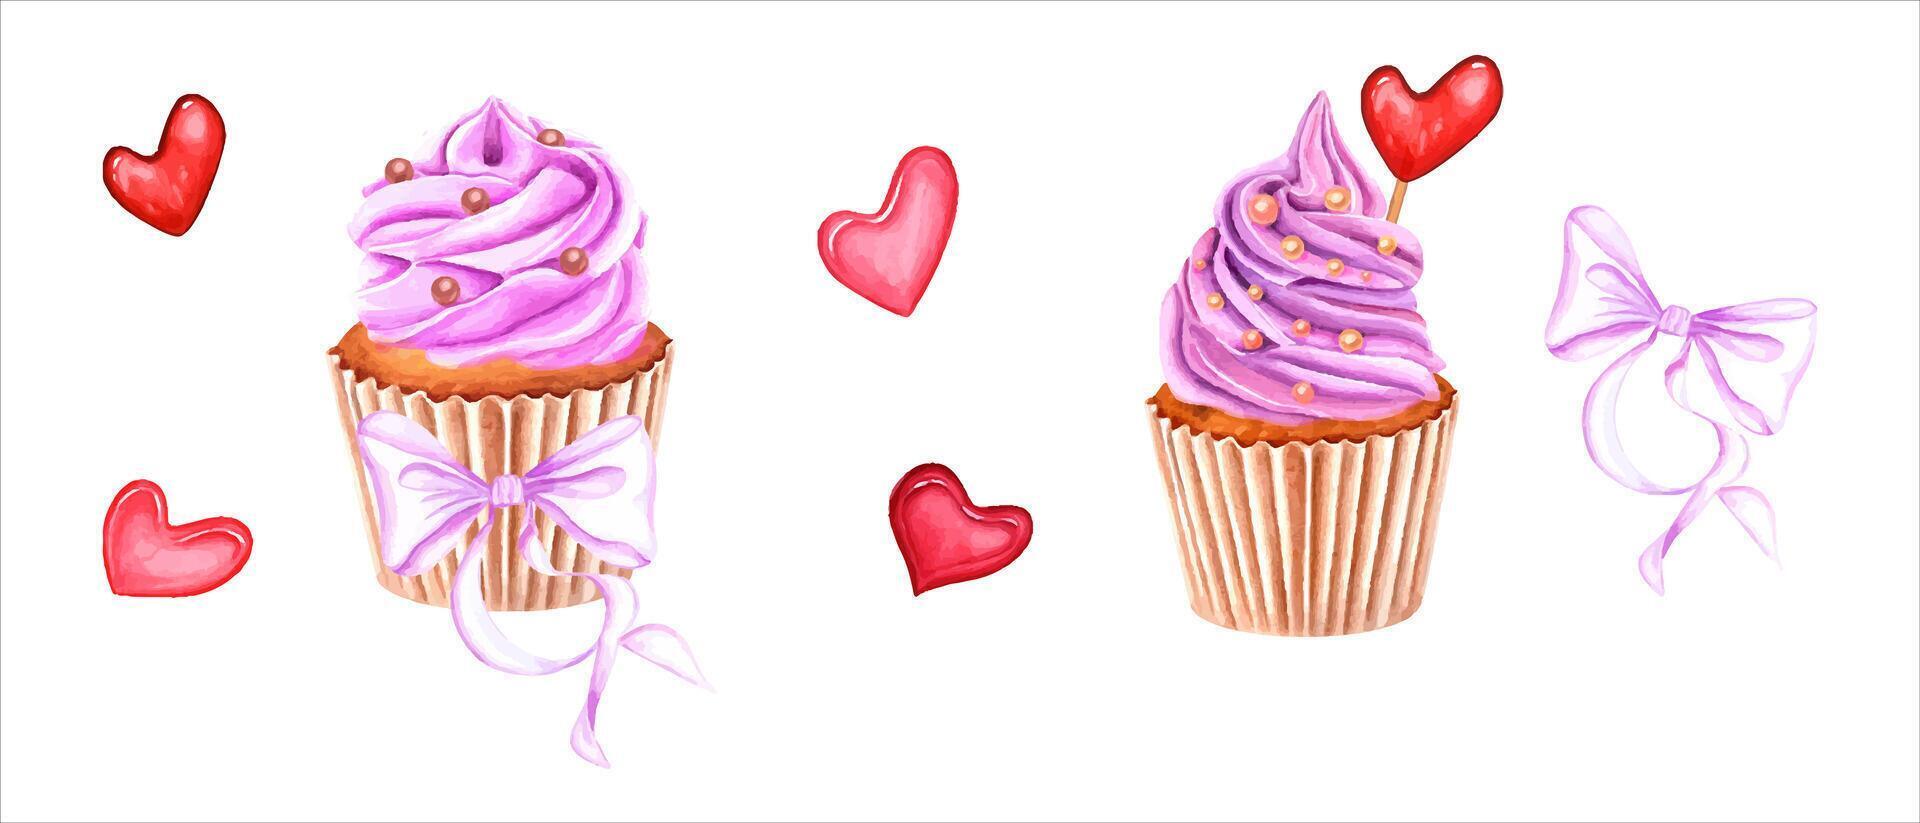 Muffins decorated with pink whipped cream, sweet sprinkles and pink bow. Dragee, candy, cake. Heart-shaped caramel on stick. Cupcake in paper wrapper. Watercolor illustration. For package, menu vector